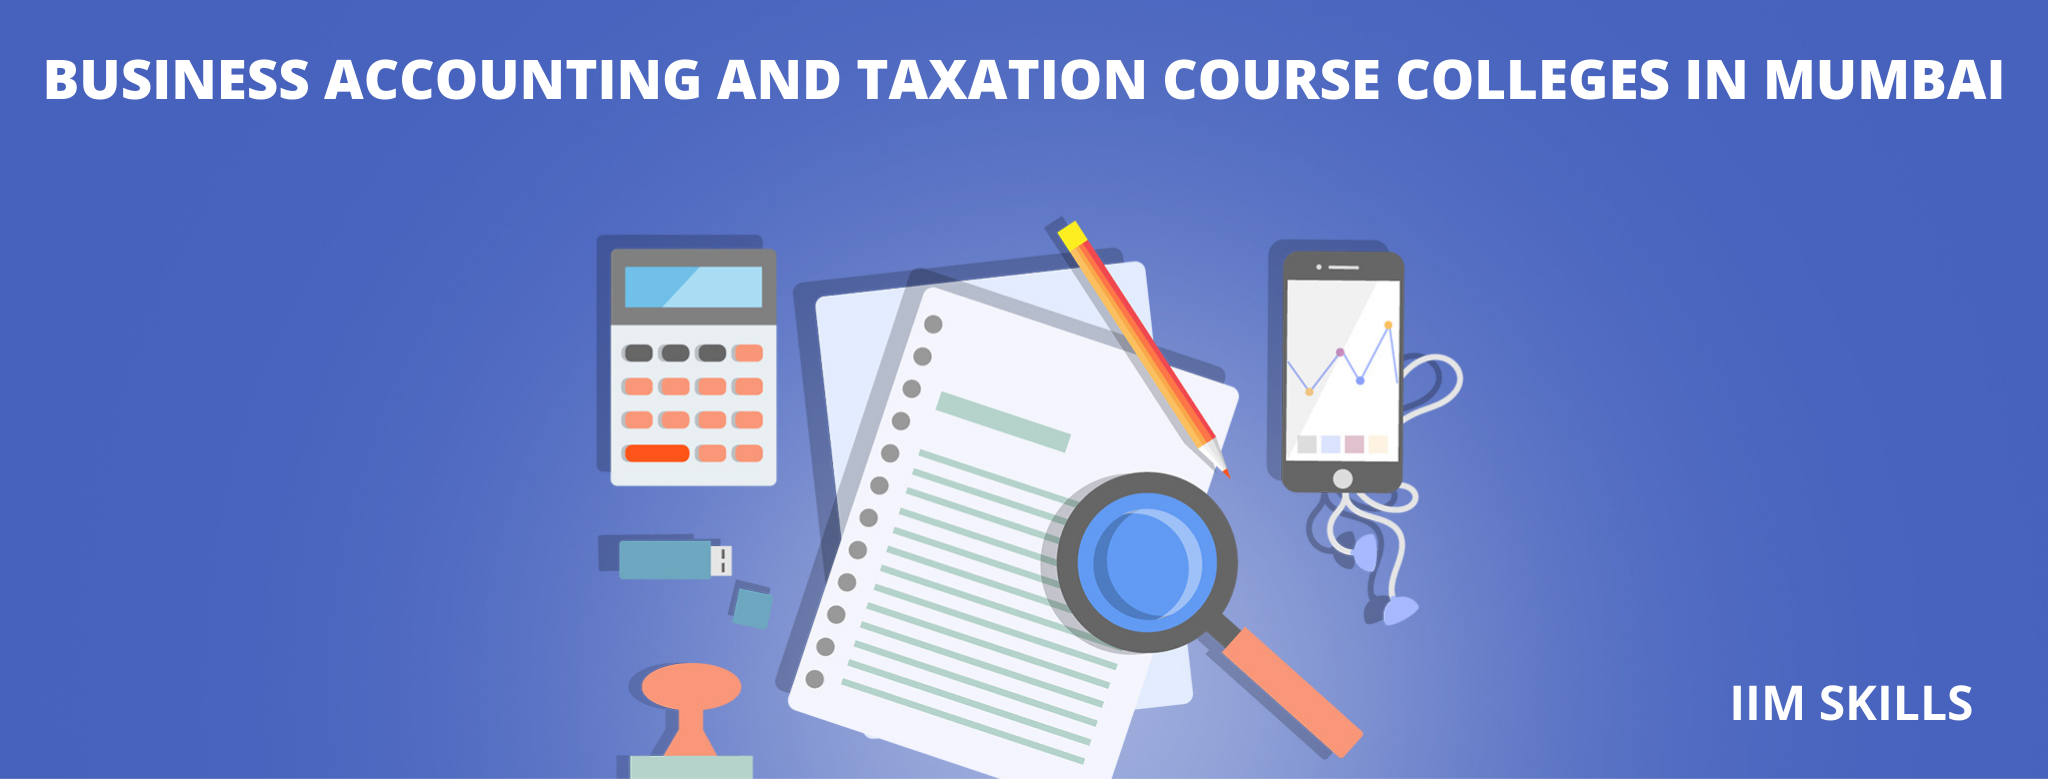 List of best business accounting and taxation course colleges in Mumbai